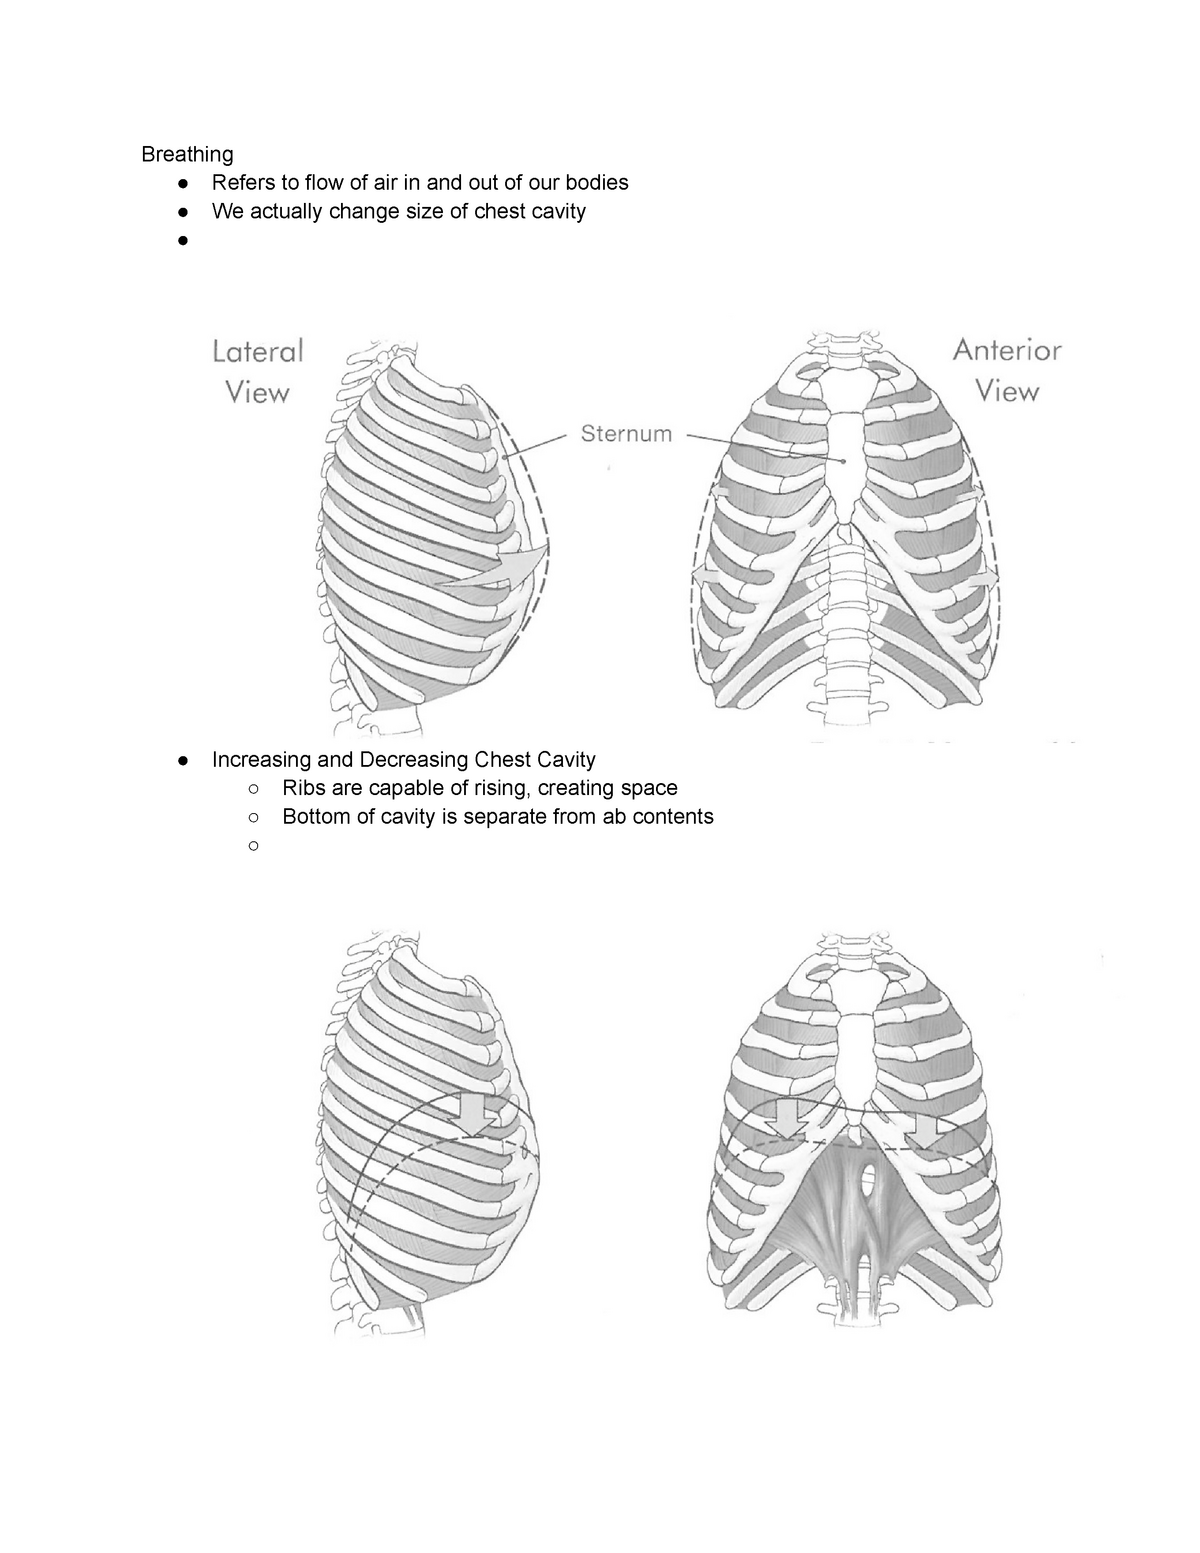 Ch 1 Anatomy of the Voice - Breathing Refers to flow of air in and out ...